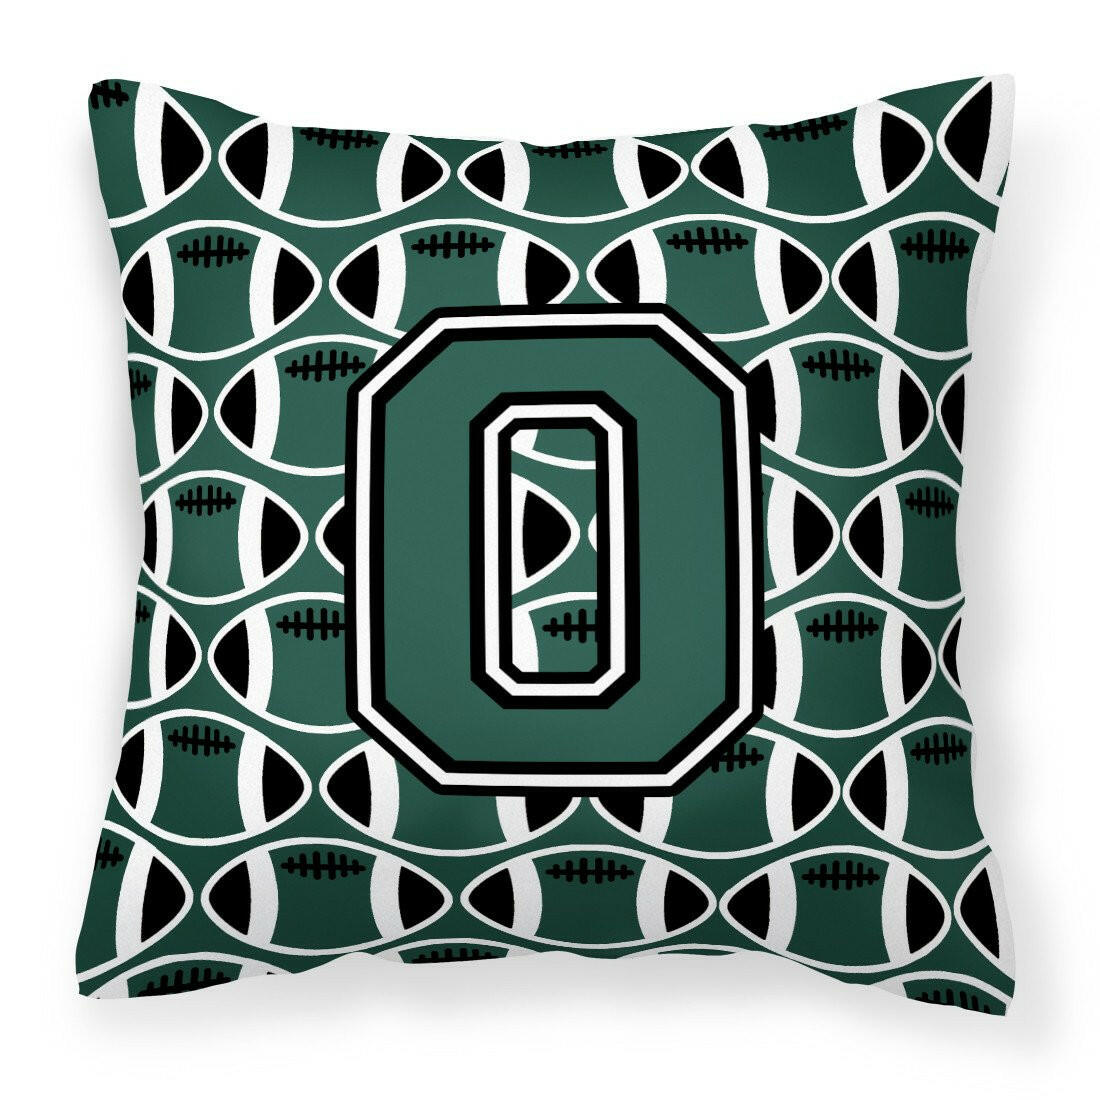 Letter O Football Green and White Fabric Decorative Pillow CJ1071-OPW1414 by Caroline's Treasures